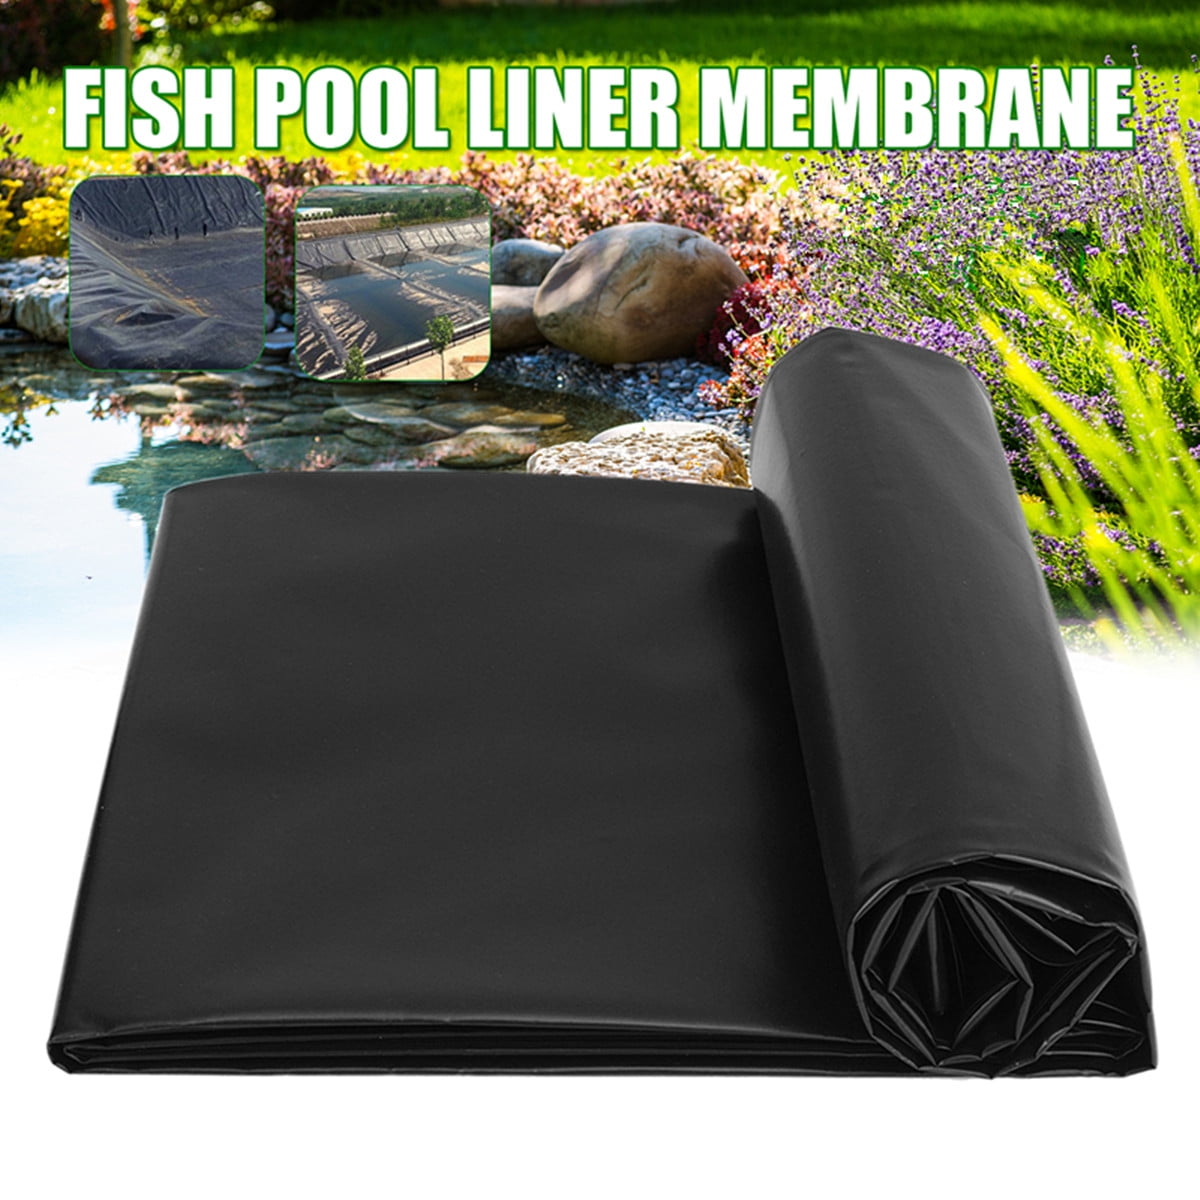 Garden Fish Pond Liners Liner Pool Membrane Reinforced Landscaping All Sizes 